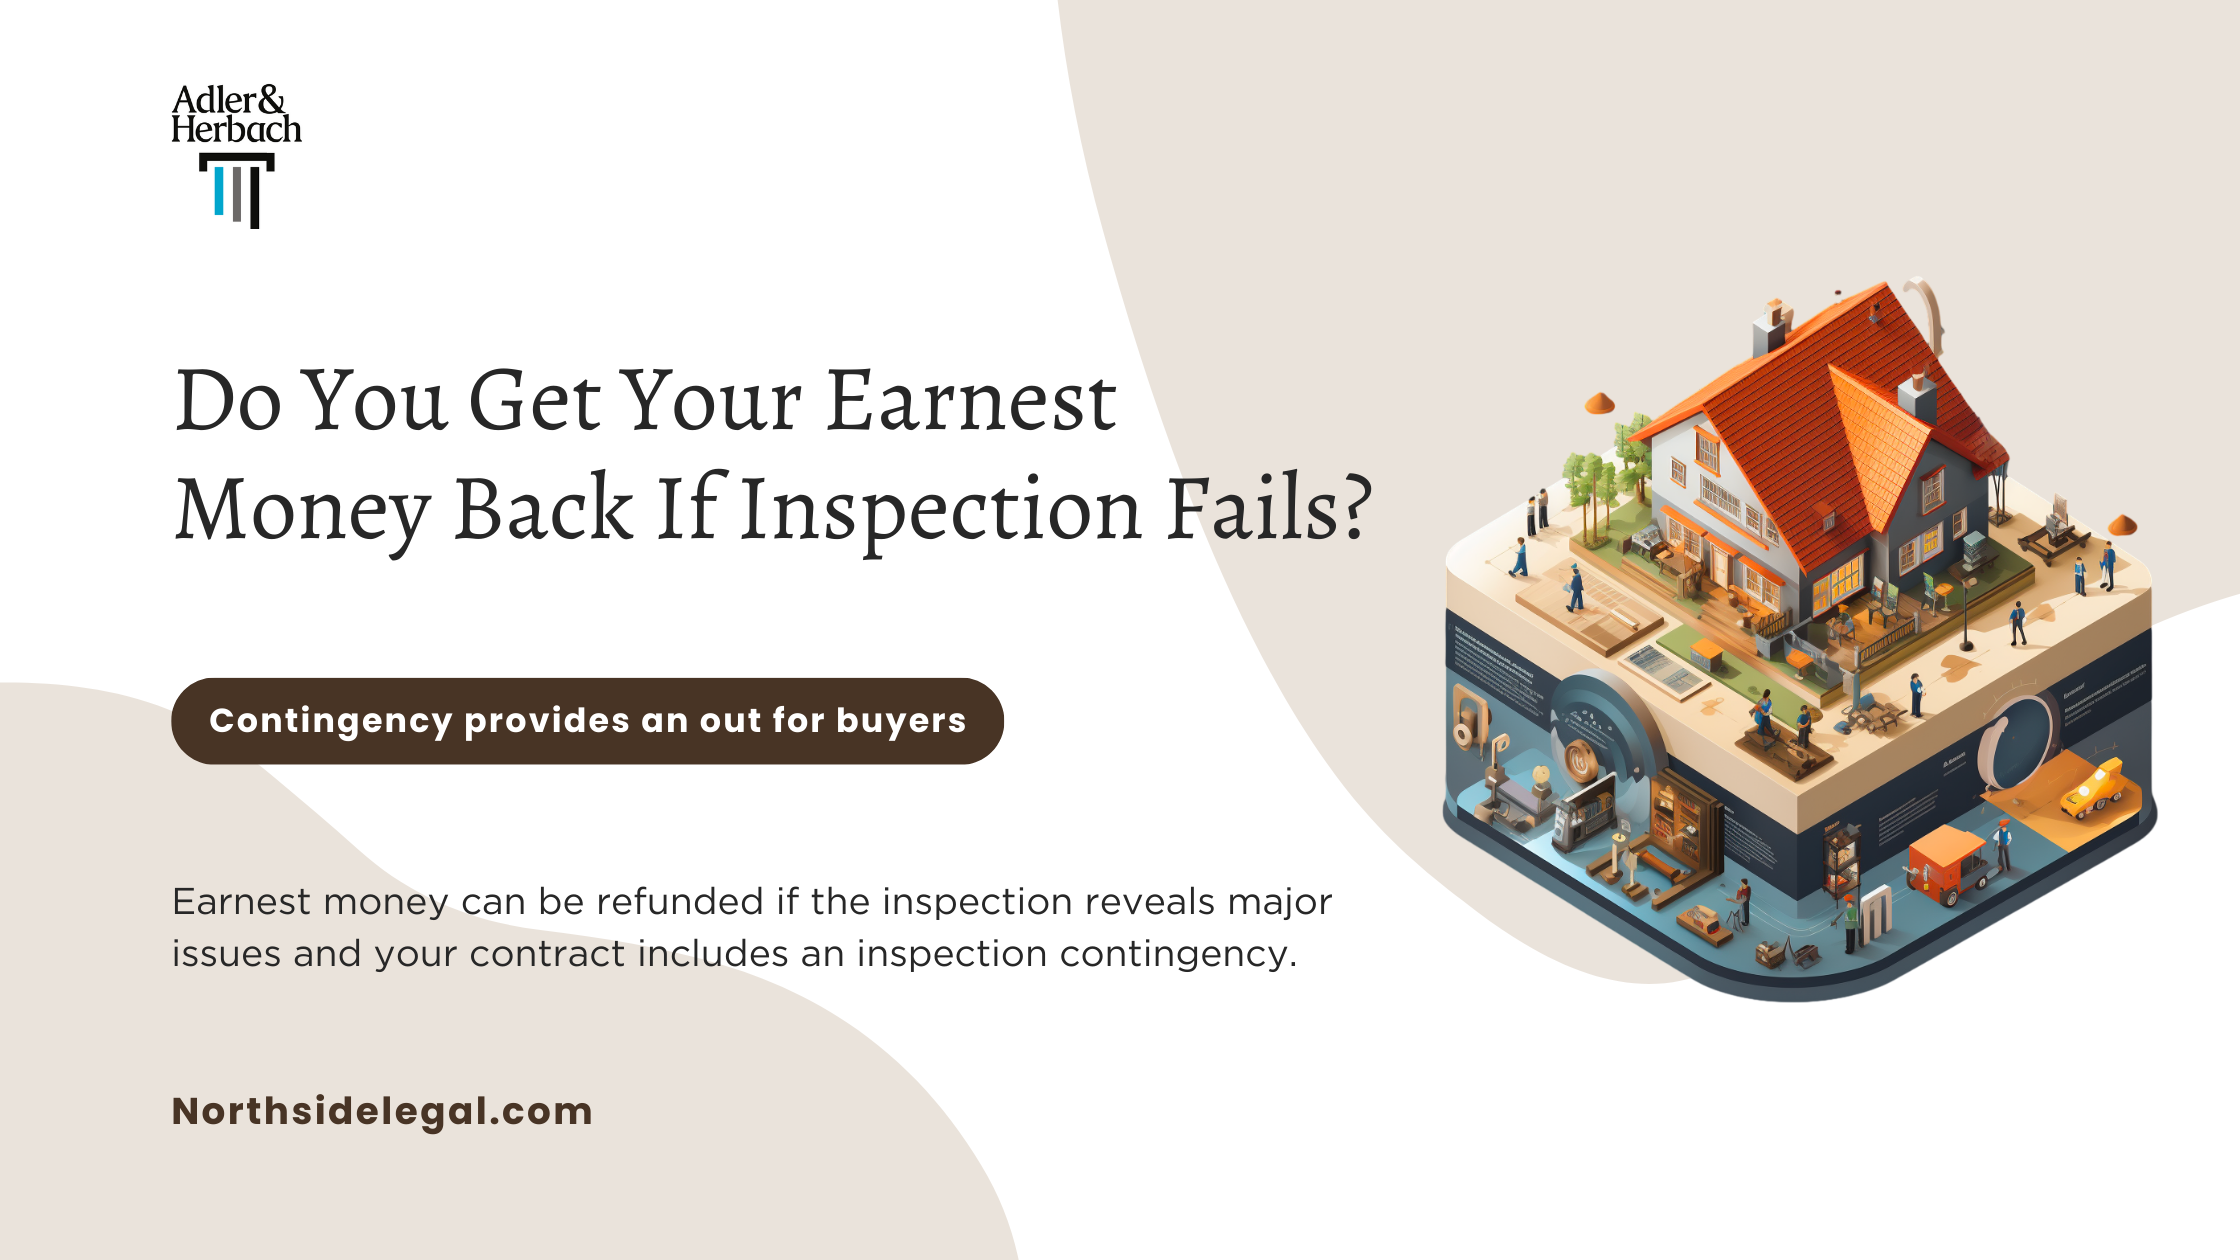 Do You Get Your Earnest Money Back If Inspection Fails?